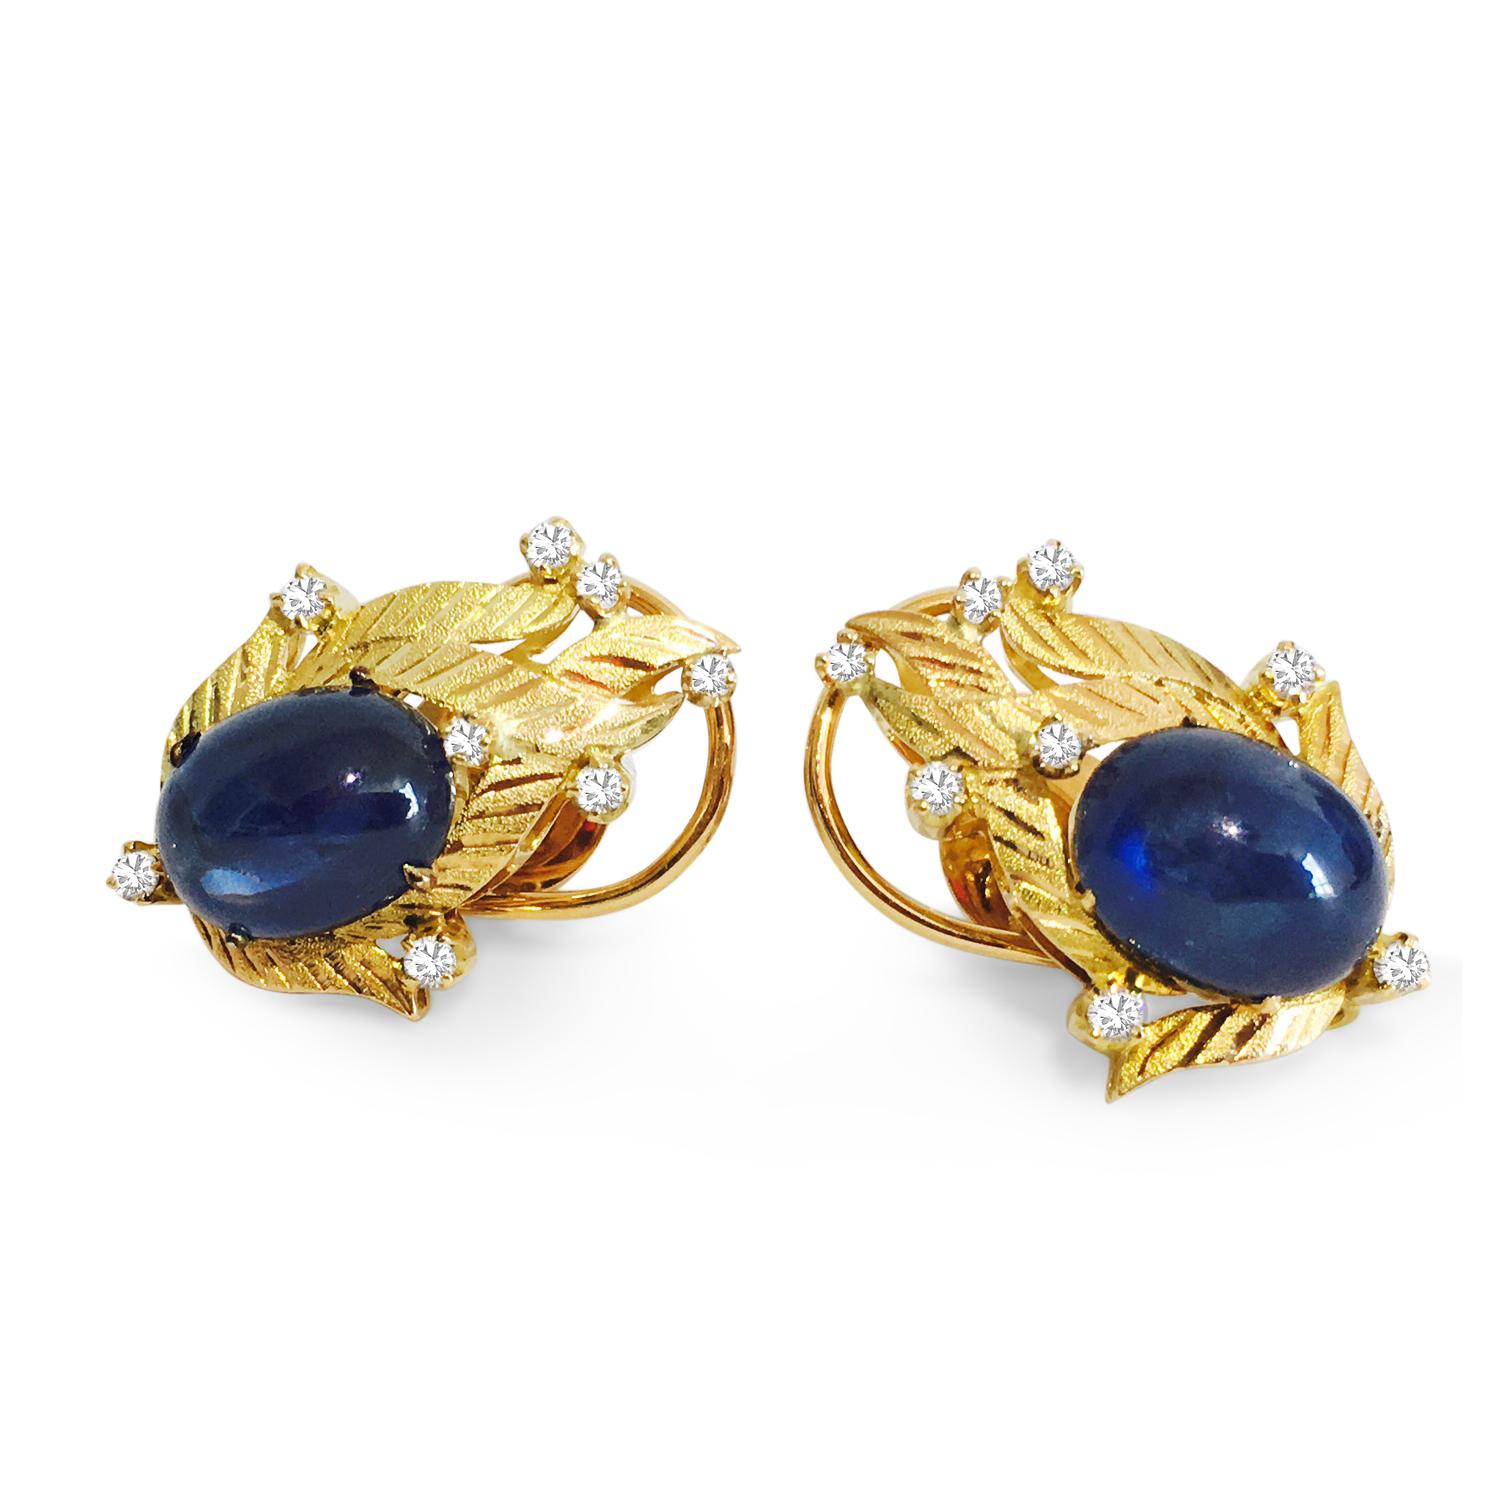 Indulge in the opulence of these vintage diamond and blue sapphire earrings, crafted from luxurious 18K yellow gold. The focal point of each earring is a breathtaking 14.50 carat natural earth-mined blue sapphire, boasting a cabochon cut with vivid